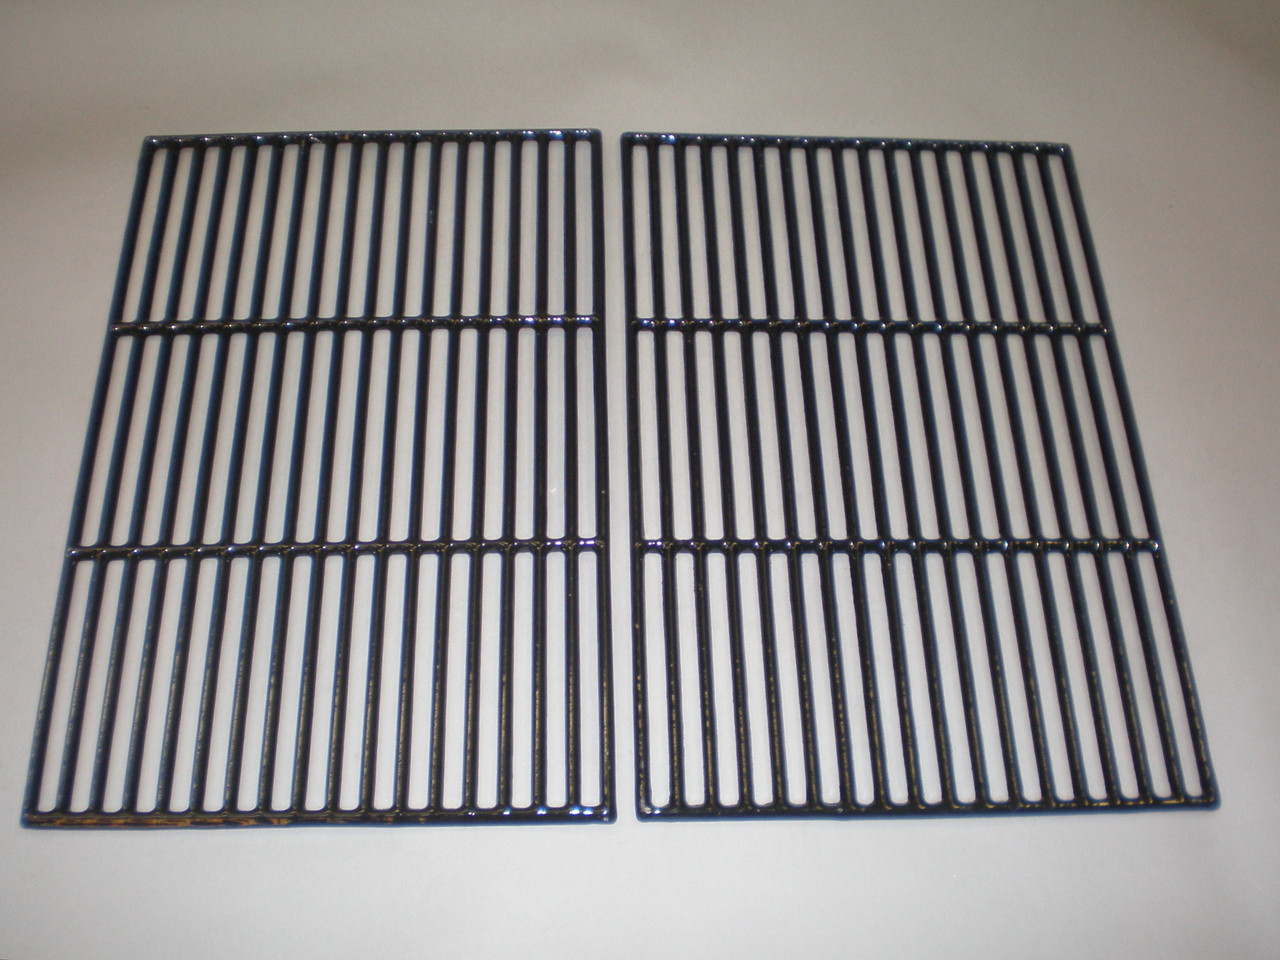 19" Cooking Grates for Charbroil Brinkmann Broil-Mate Charmglow Grill 2 Pack 